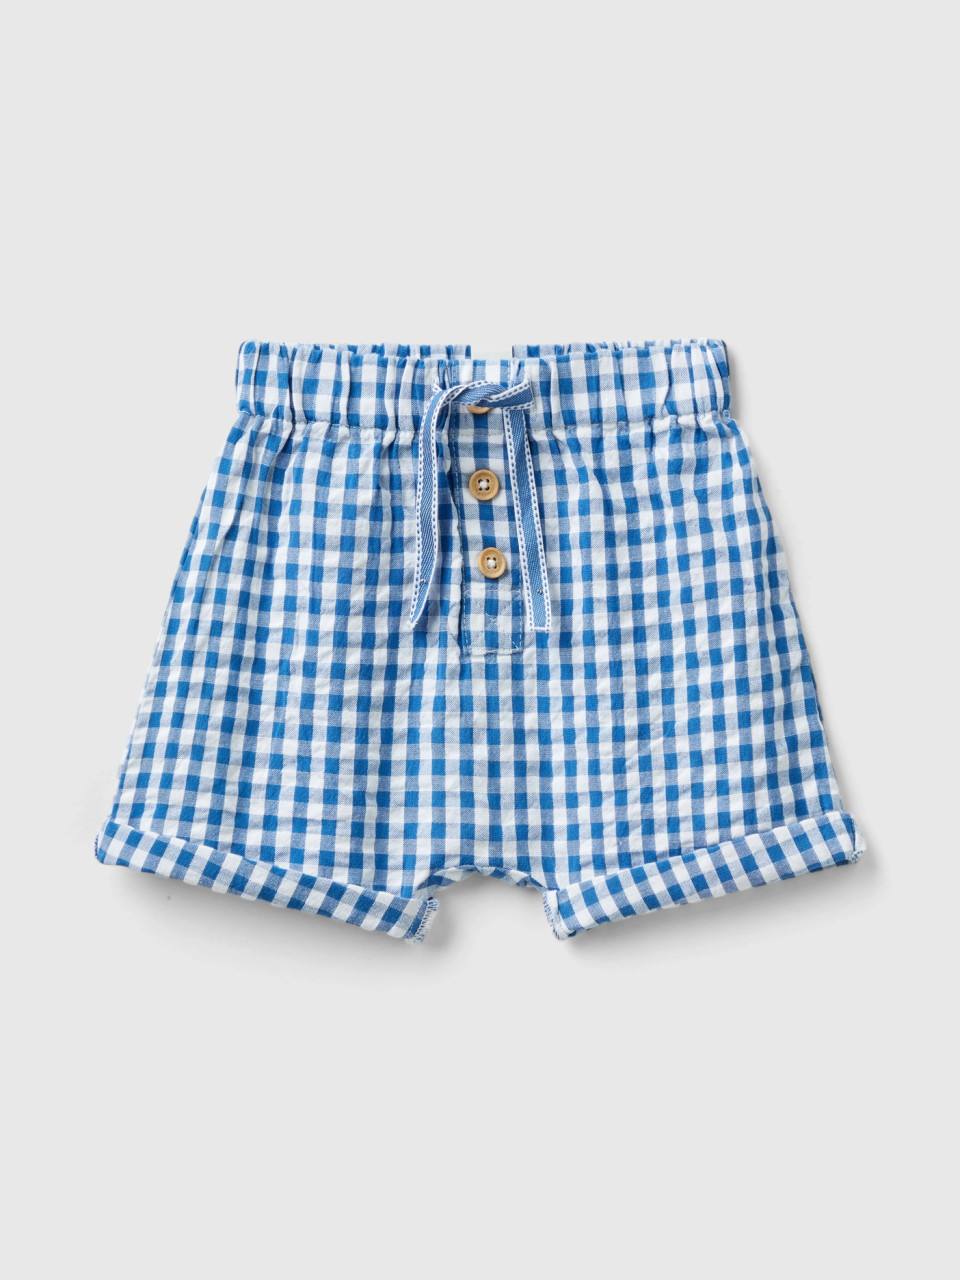 Benetton, Vichy Shorts In Pure Cotton, Blue, Kids